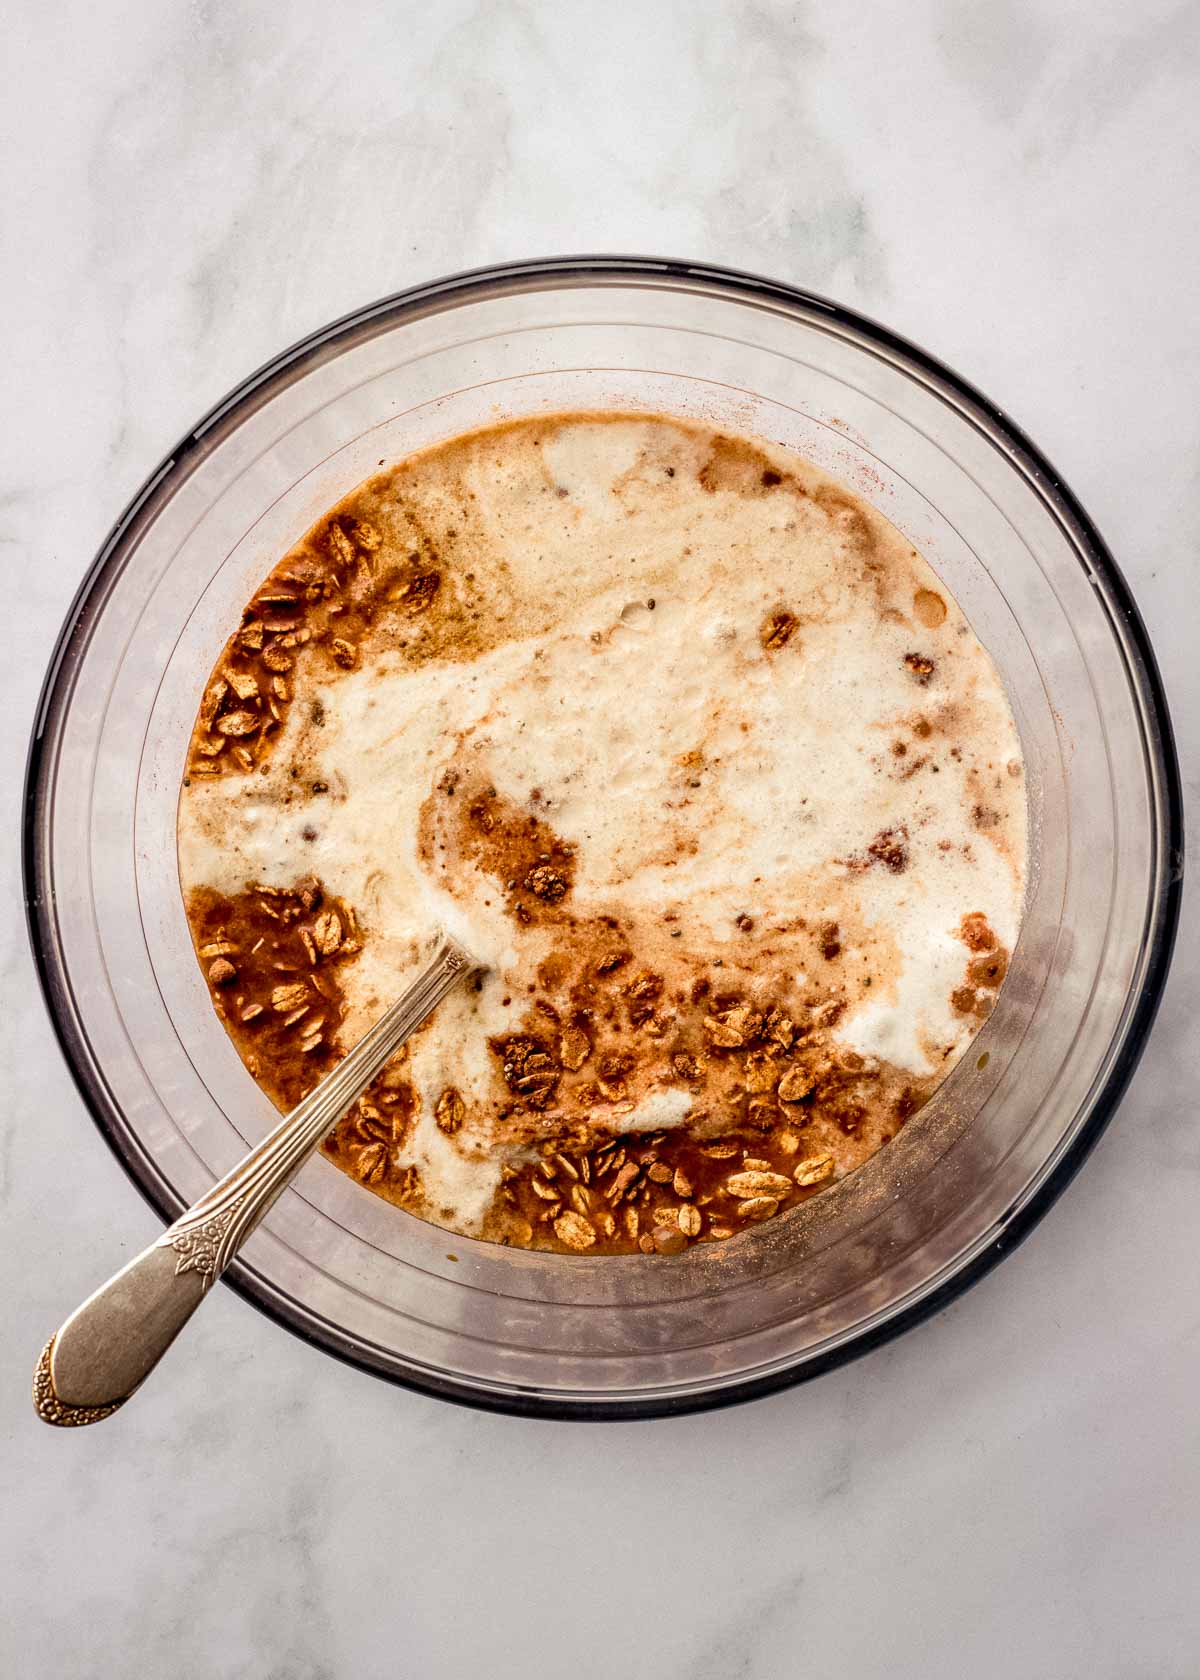 A large glass bowl of tiramisu overnight oats ingredients with a spoon in it is ready to be stirred.